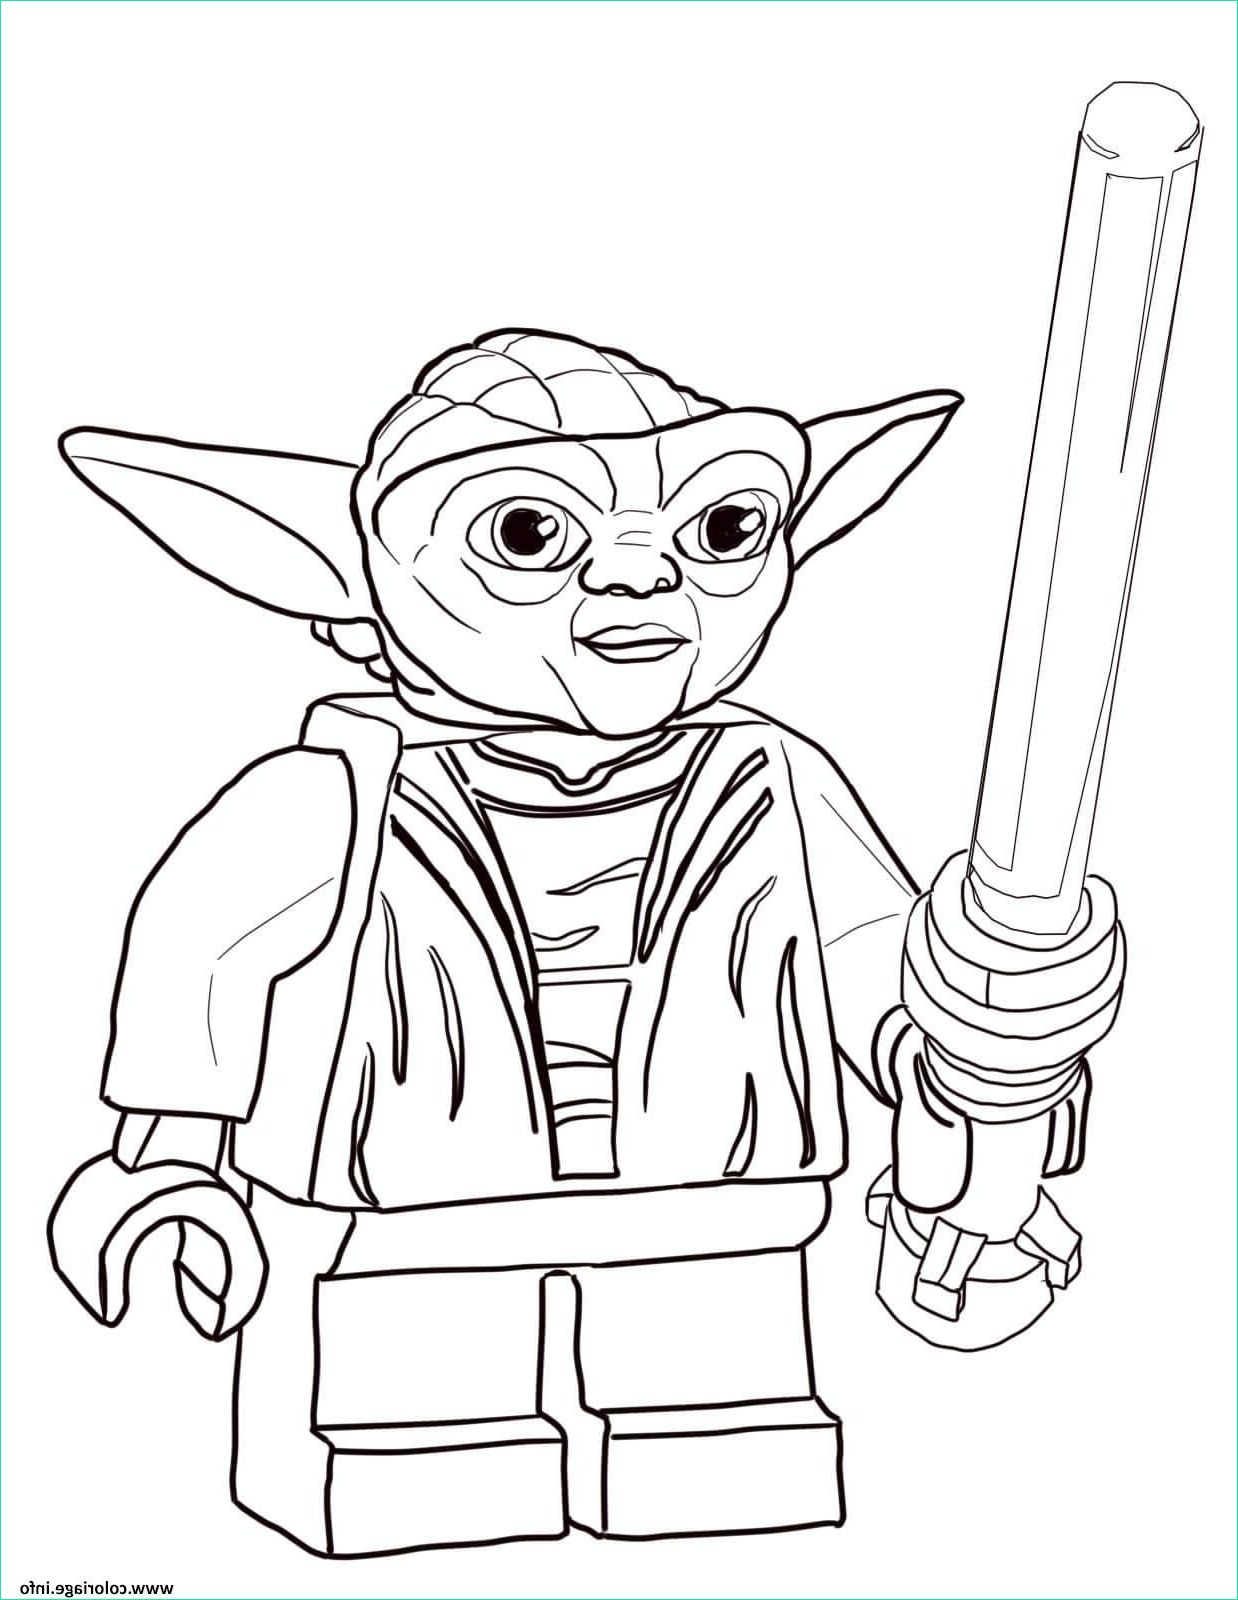 Coloriage Star Wars Lego Luxe Photos Coloriage Star Wars Lego Jecolorie